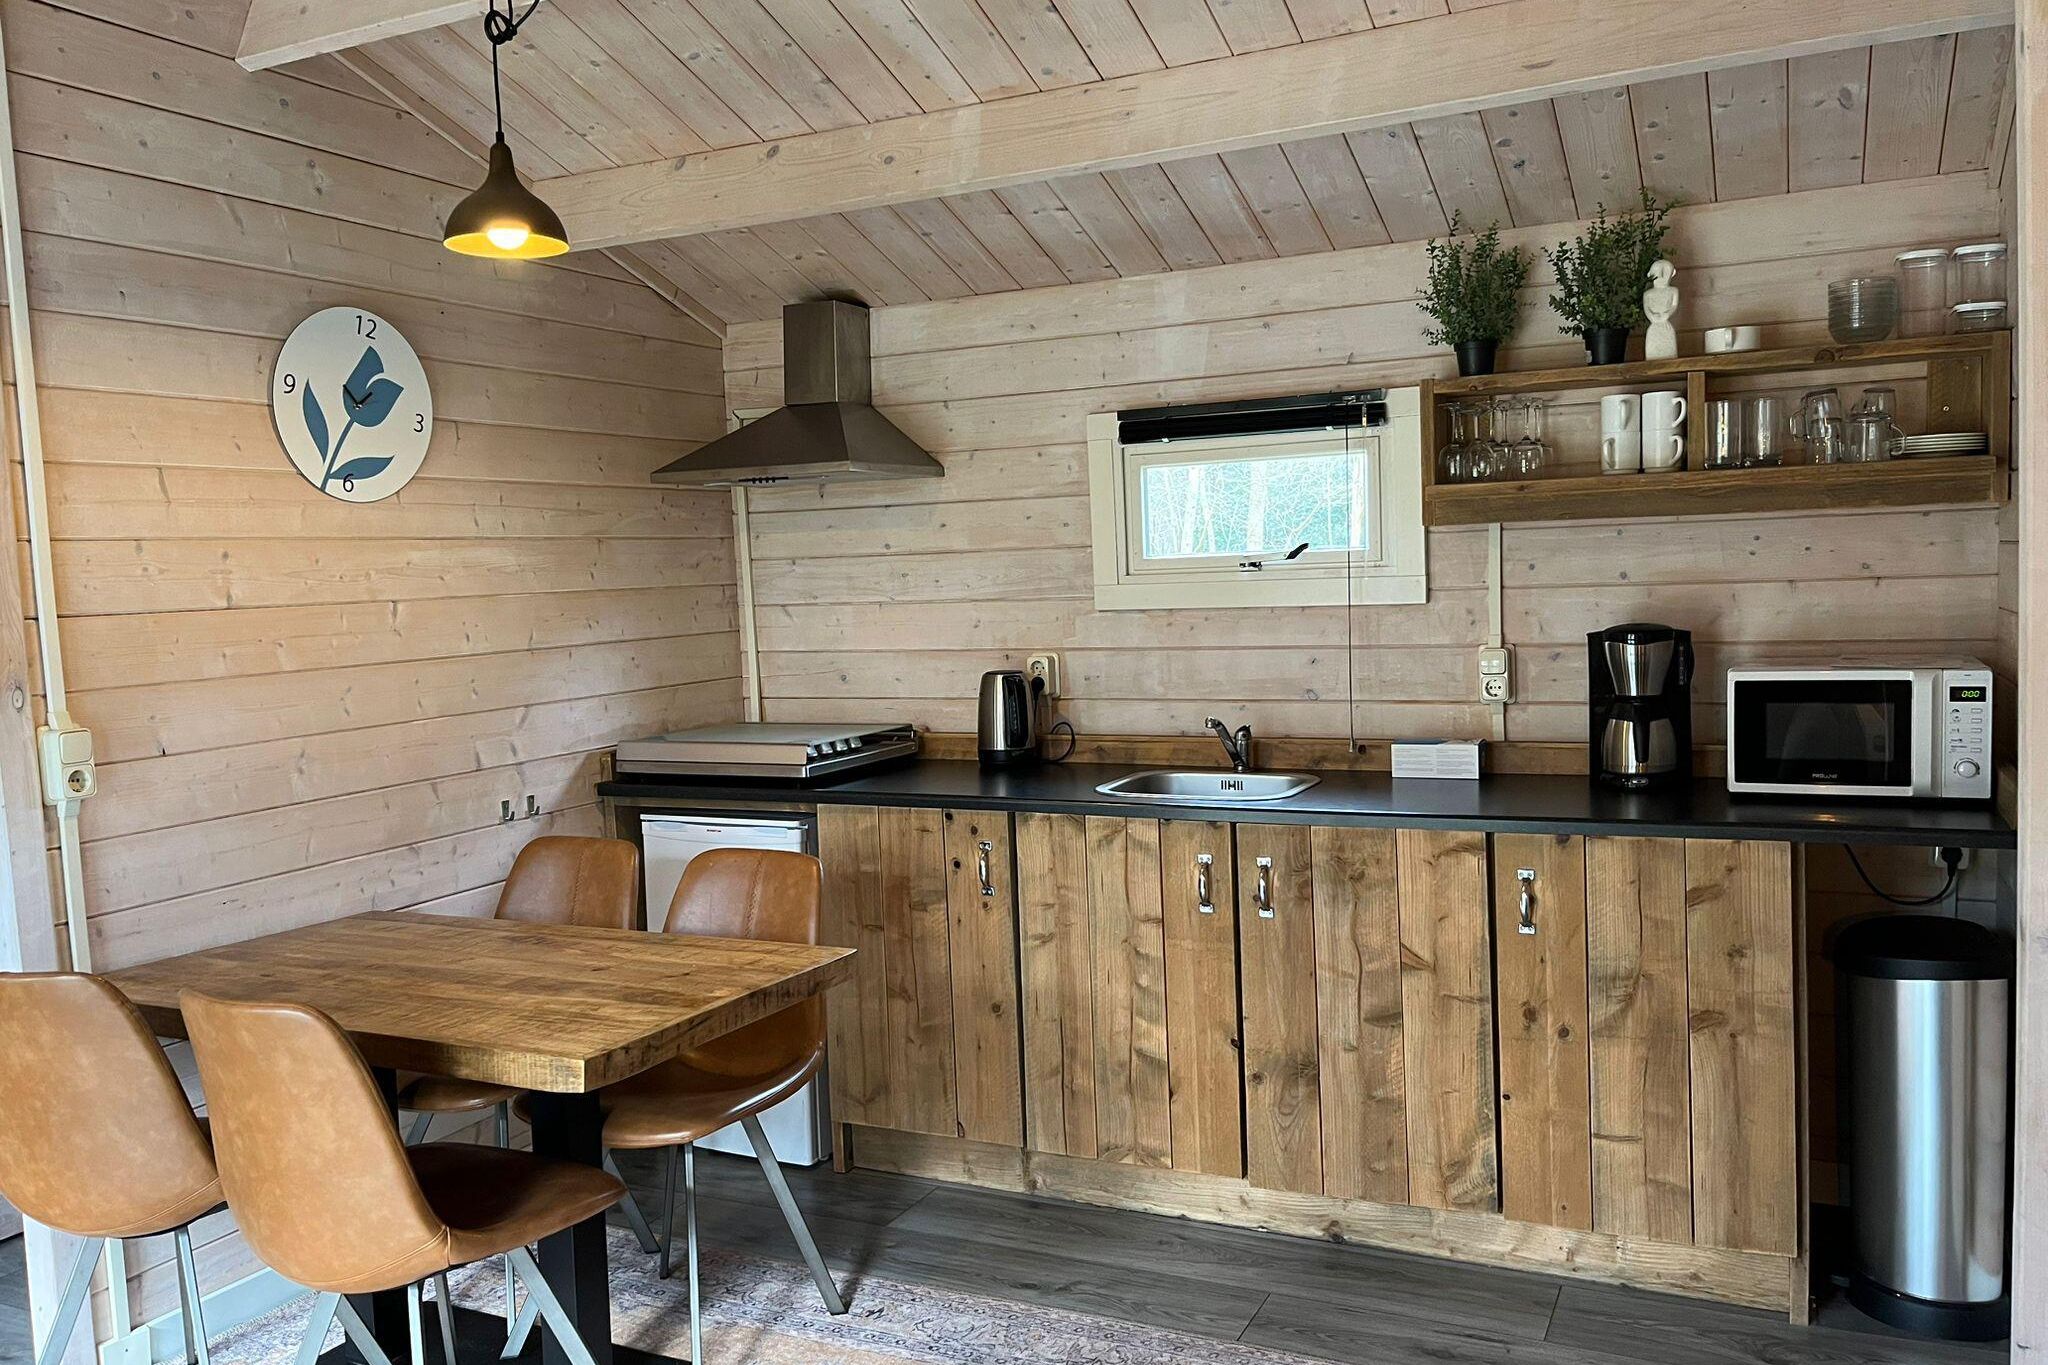 Wooden chalet near three national parks